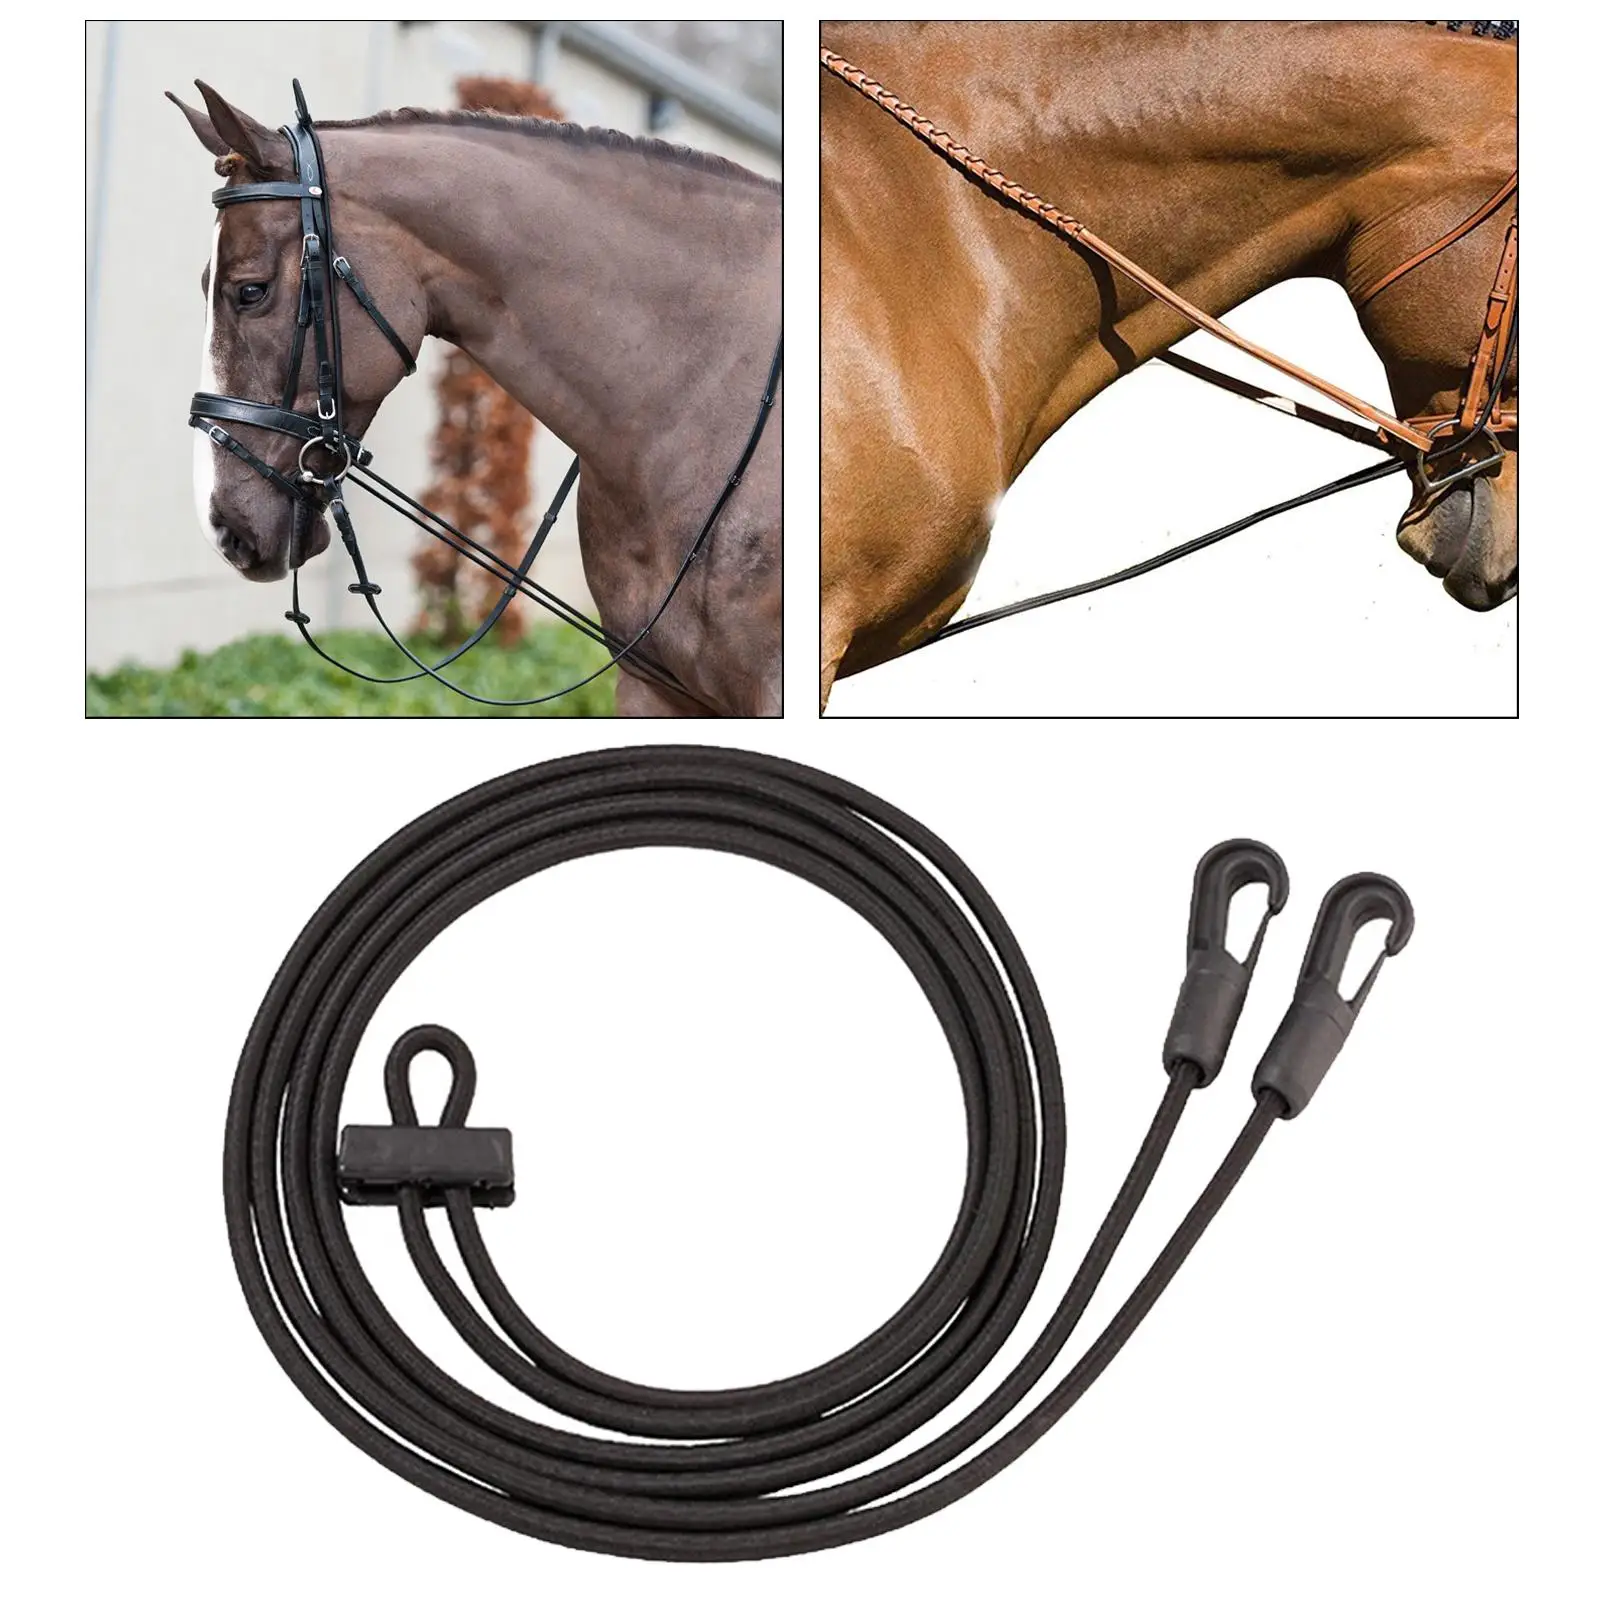 Horse Reins Training Rope Flexible for Correct Aid Racecourse Riding